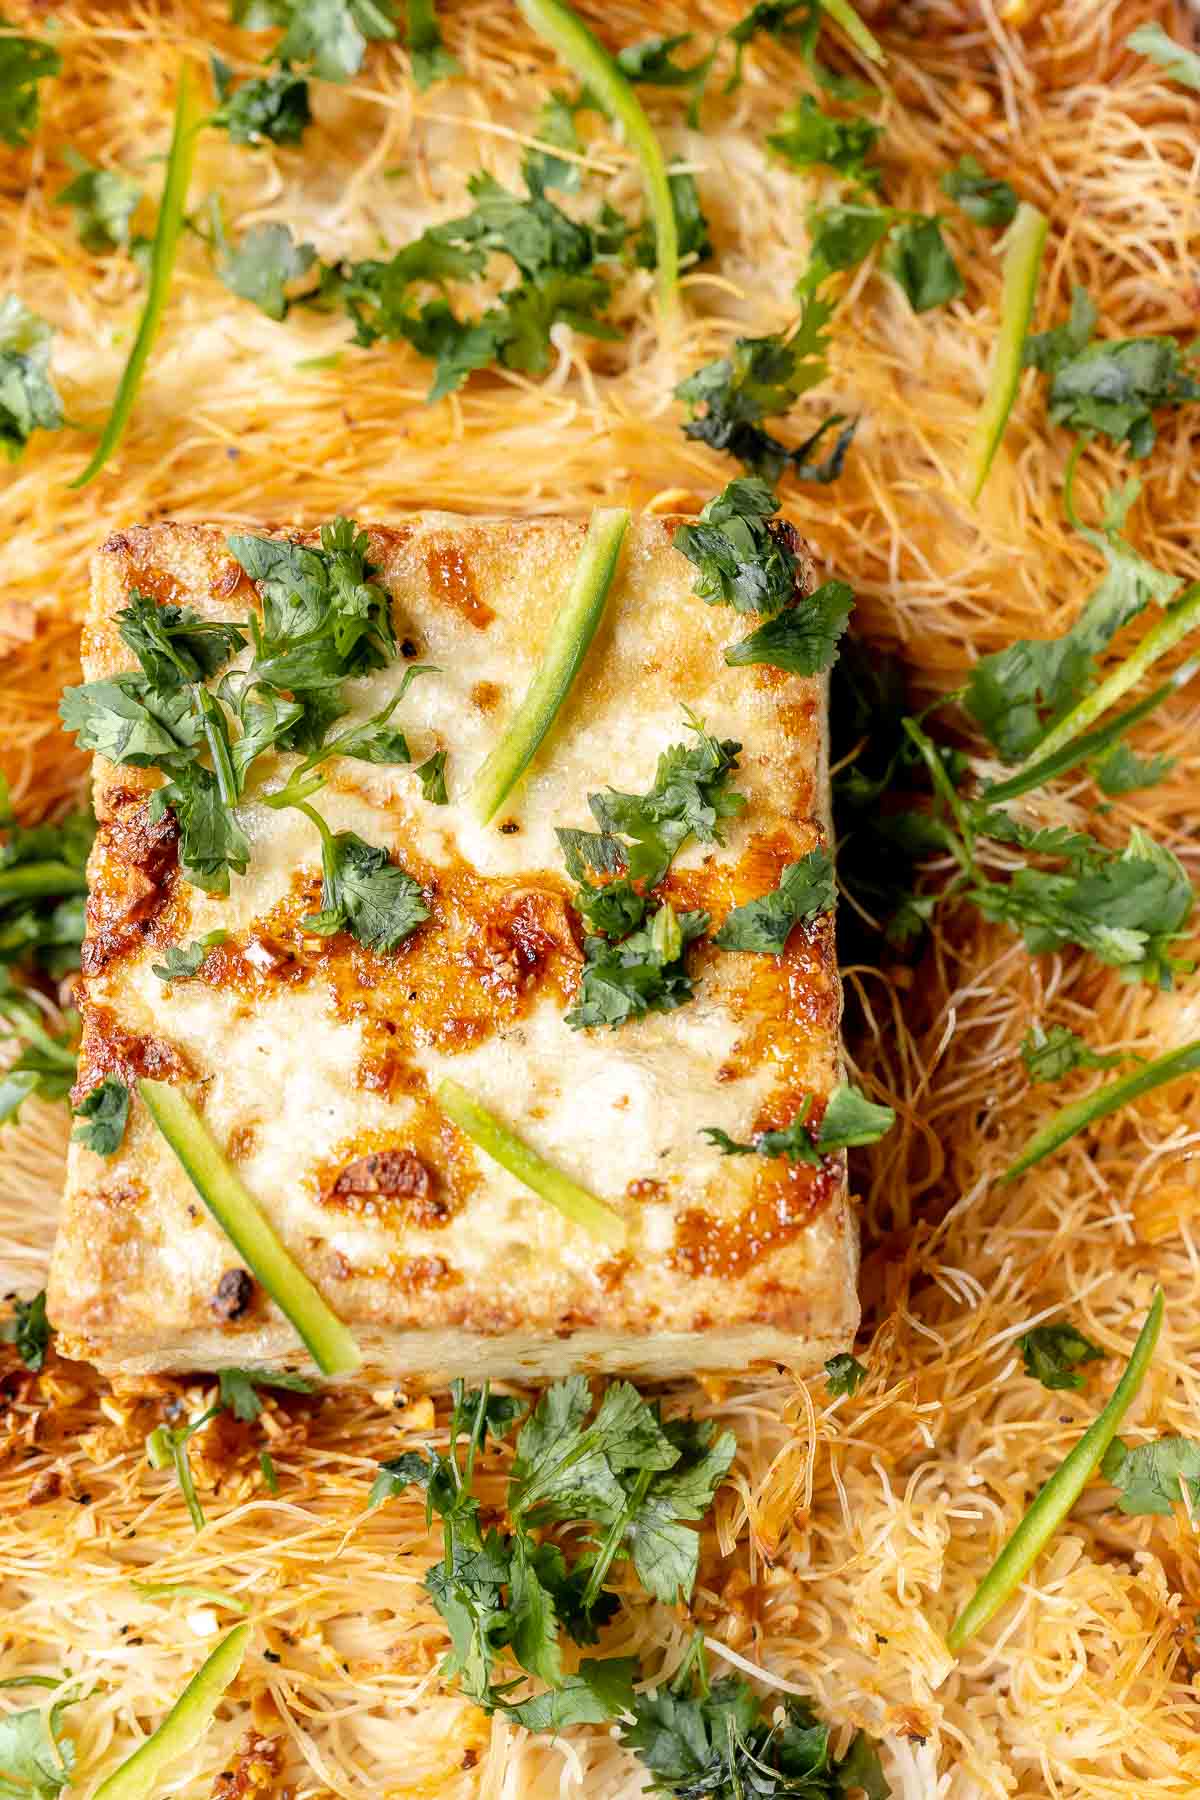 A block of white tofu topped with fresh cilantro, resting on a bed of thin cooked noodles.